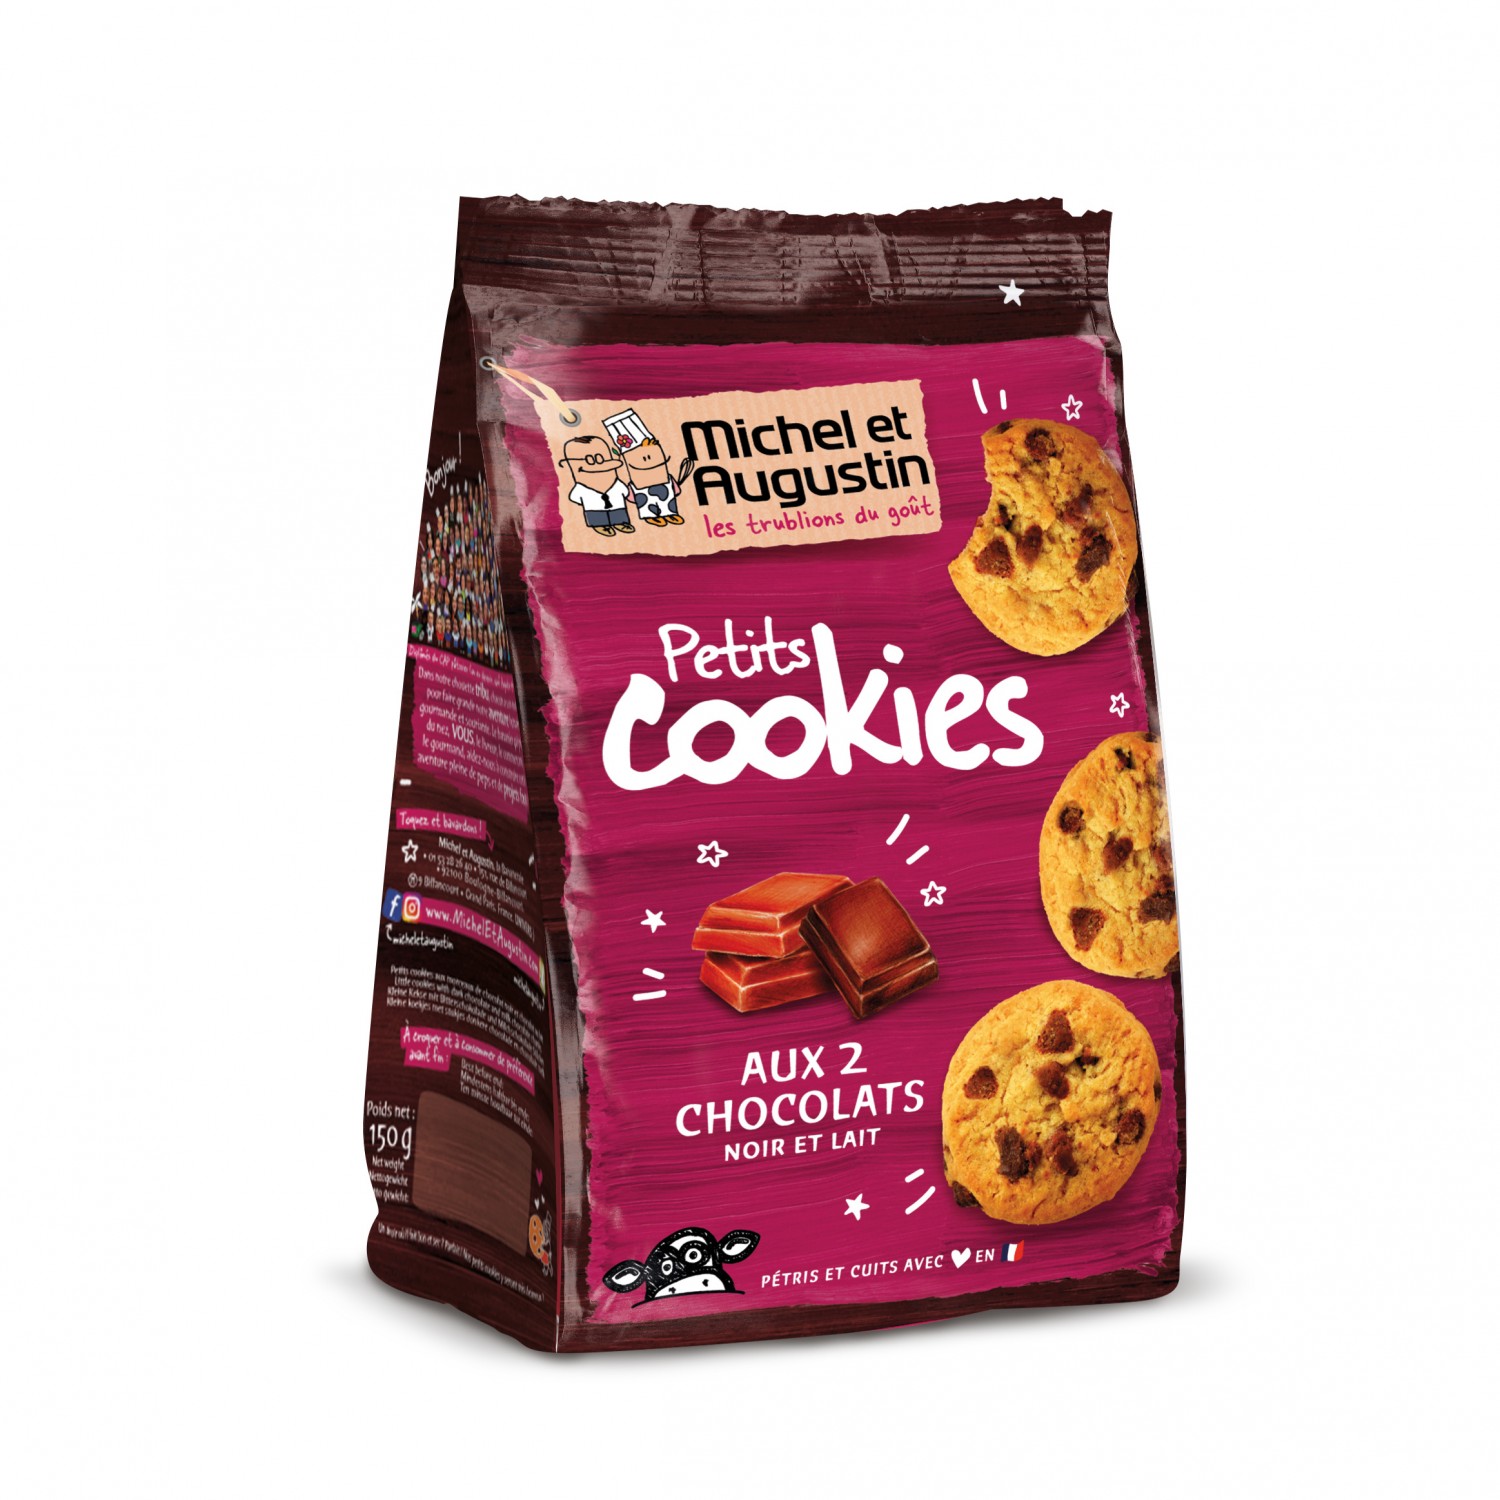 https://my-french-grocery.com/wp-content/uploads/2018/04/Min-i-Cookies-Michel-et-Augustin.jpg